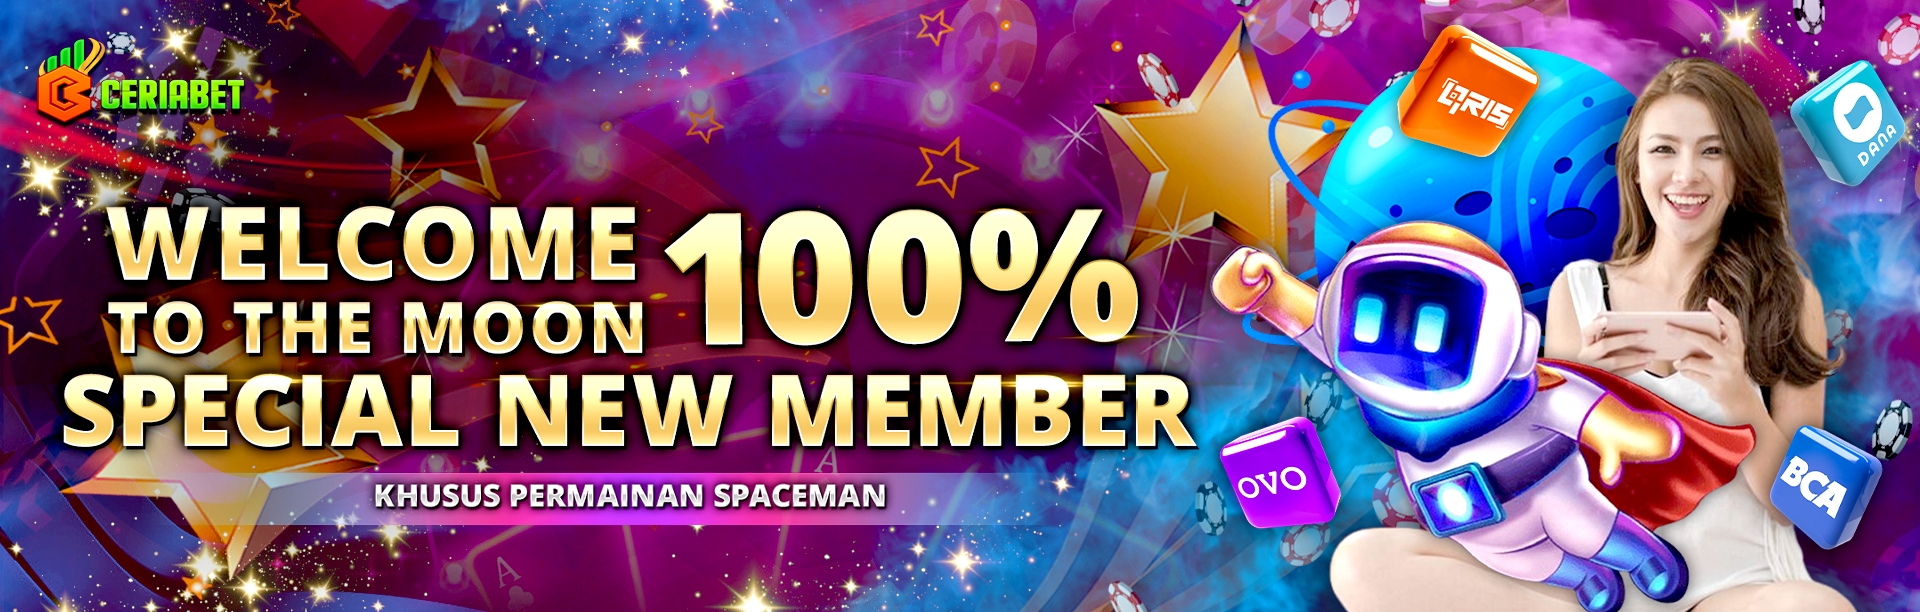 WELCOME TO THE MOON SPECIAL NEW MEMBER 100% KHUSUS SPACEMAN